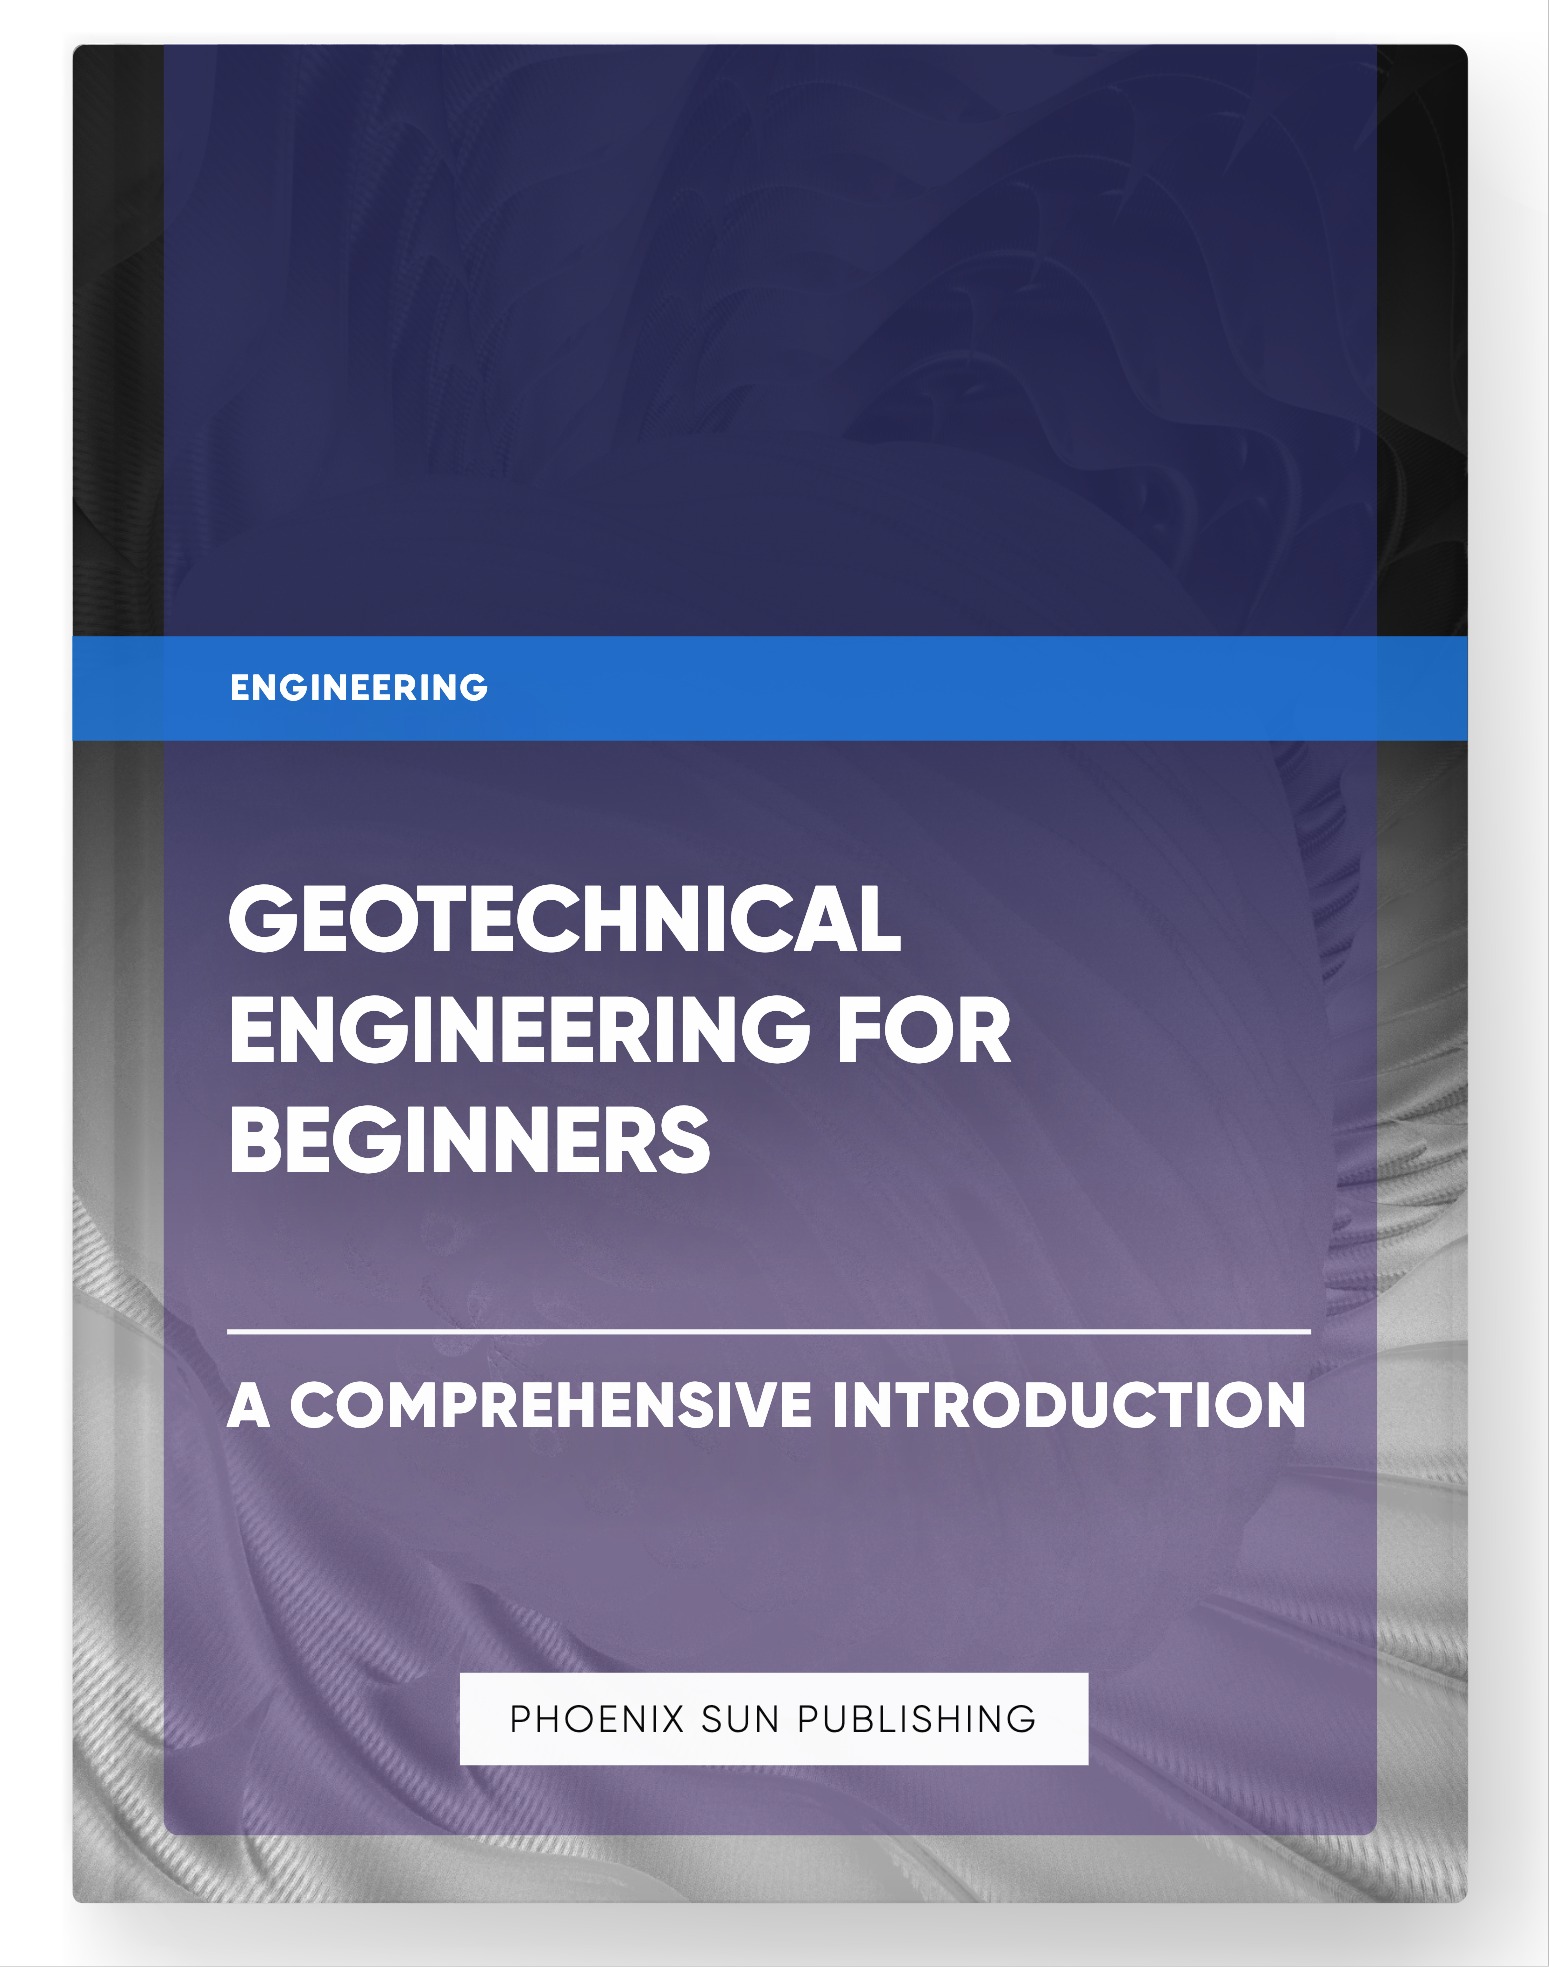 Geotechnical Engineering for Beginners – A Comprehensive Introduction